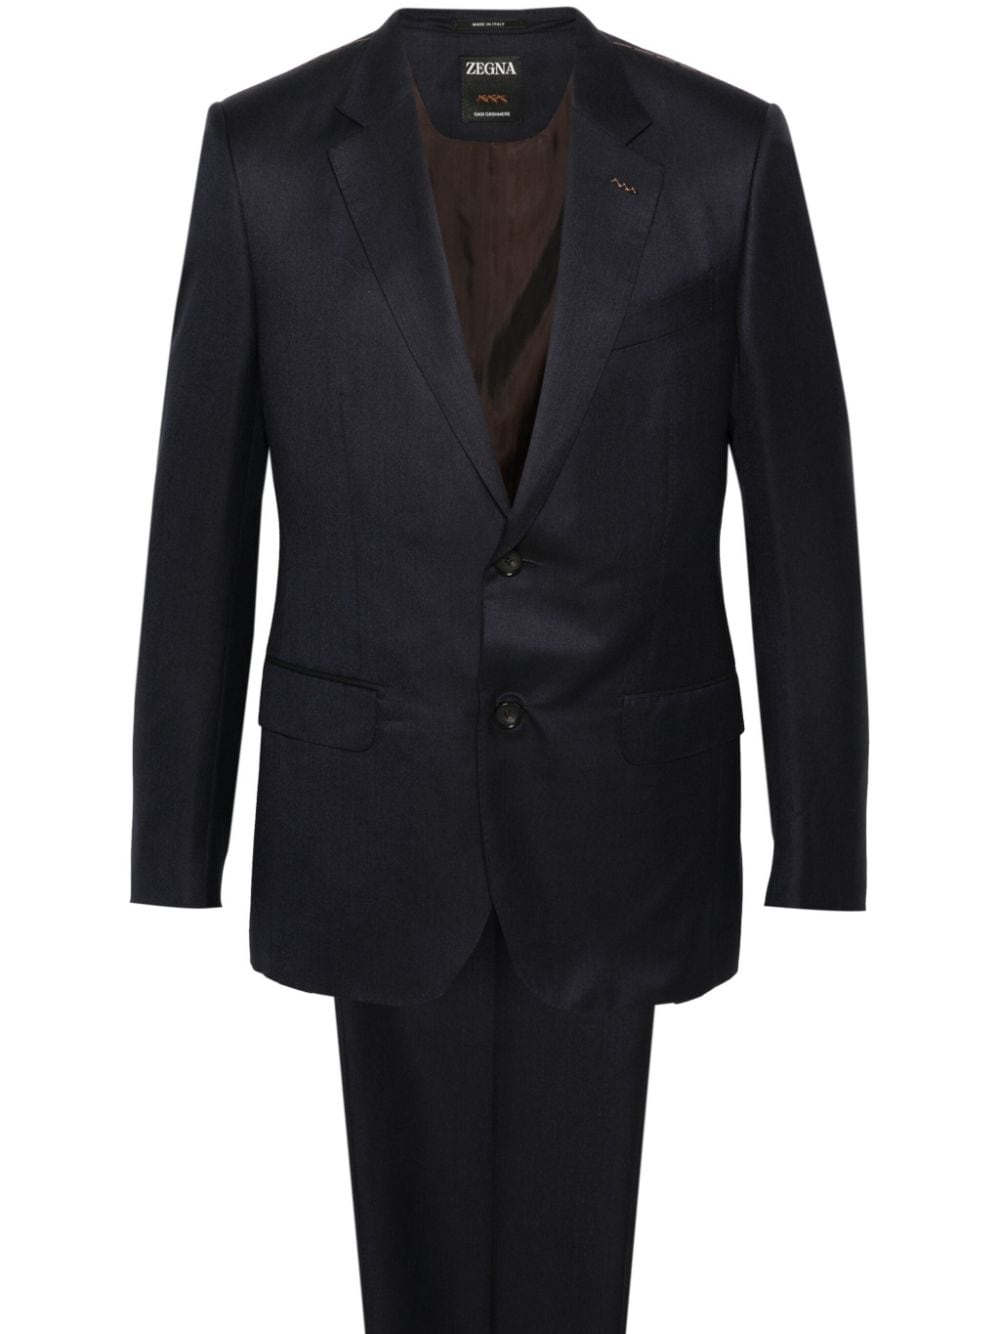 Image 1 of Zegna single-breasted cashmere suit